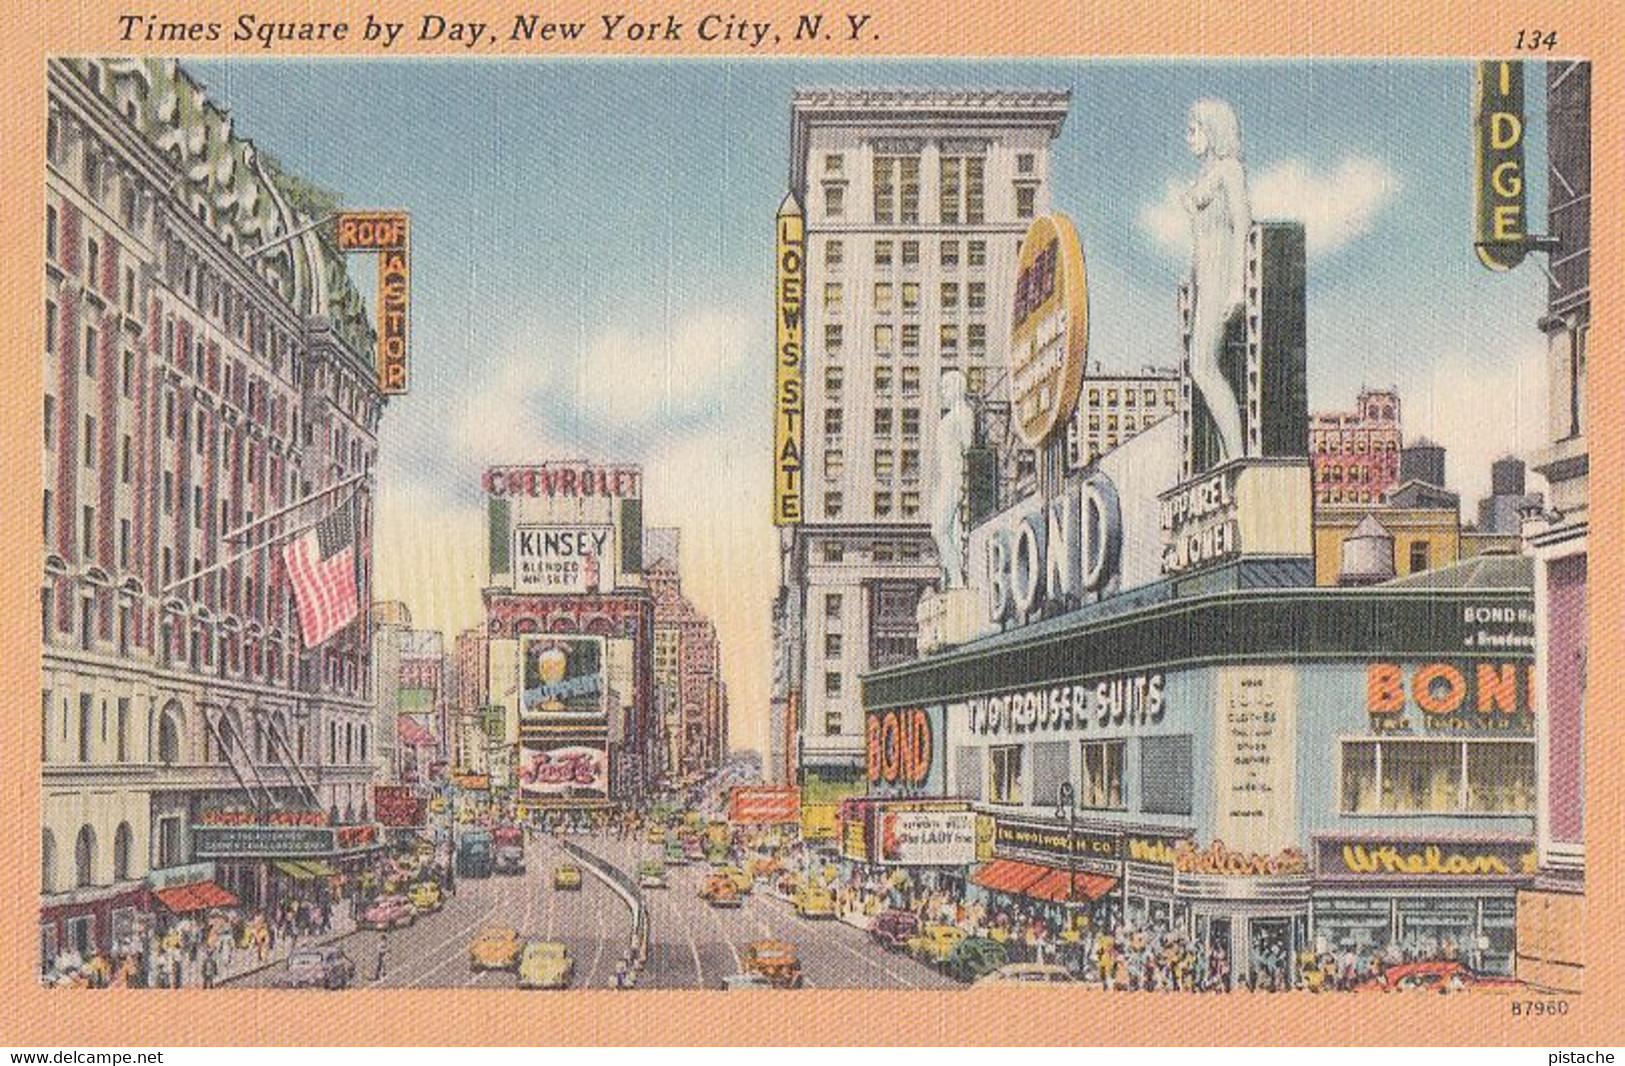 New York City - Times Square - Stamp Postmark - Animation - Written 1971 - No. 134 - 2 Scans - Time Square